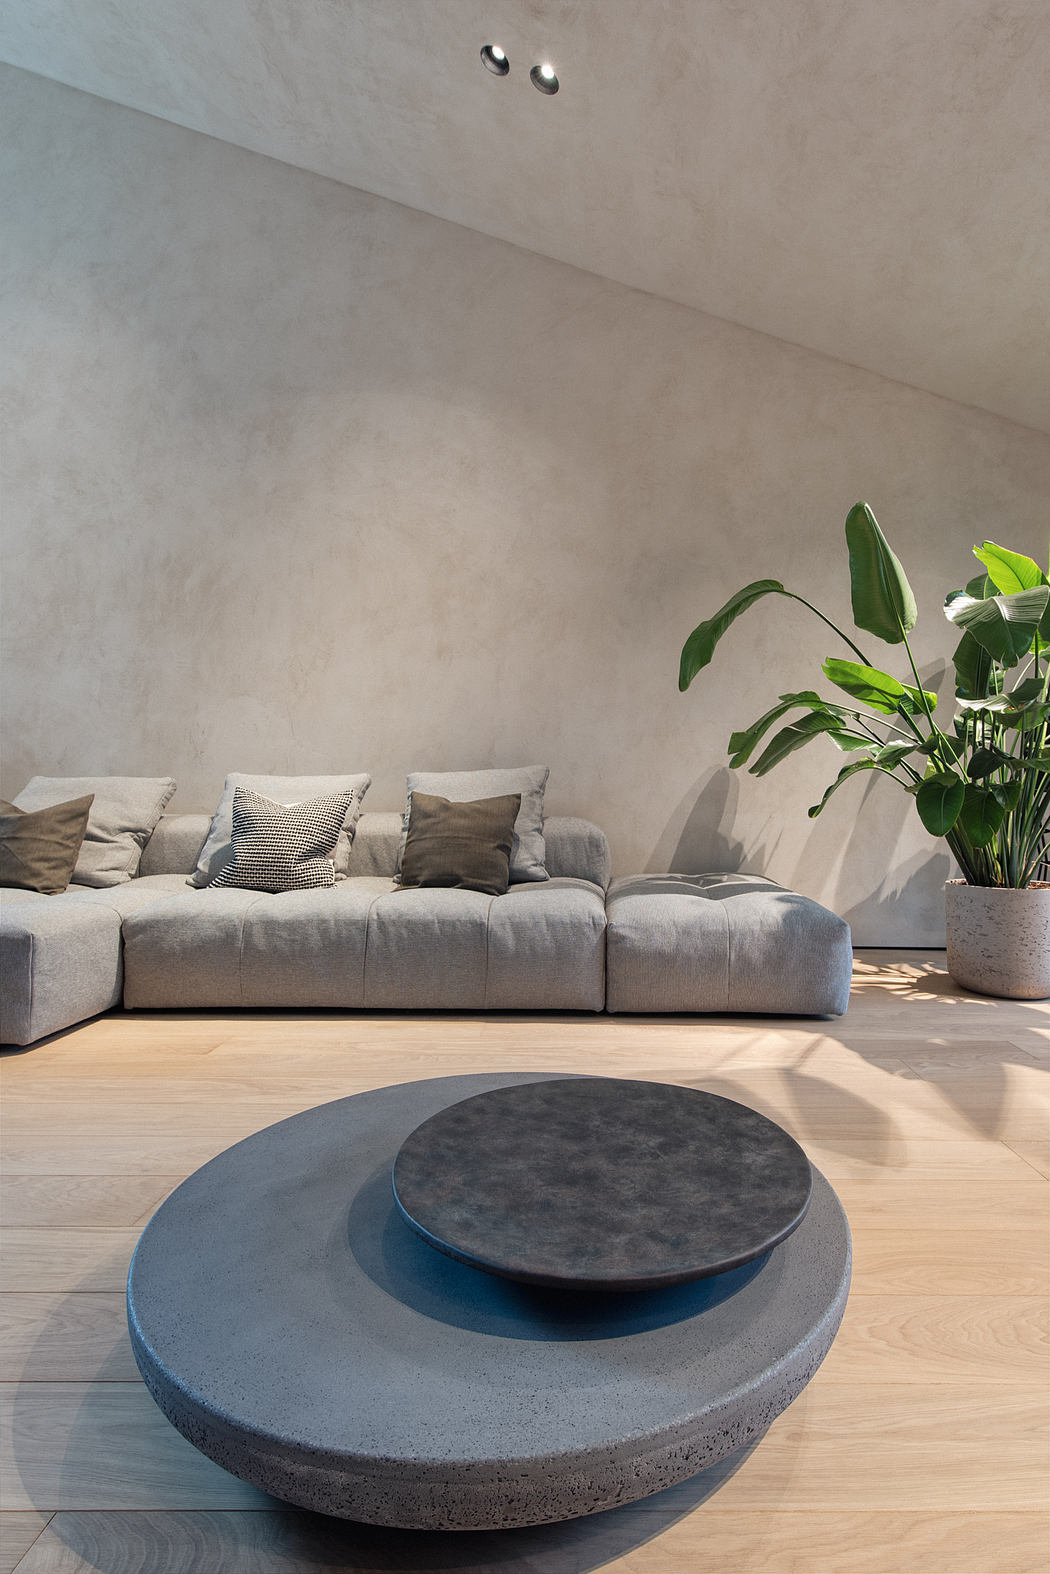 A modern, minimalist living room with a concrete coffee table and lush, potted plant.